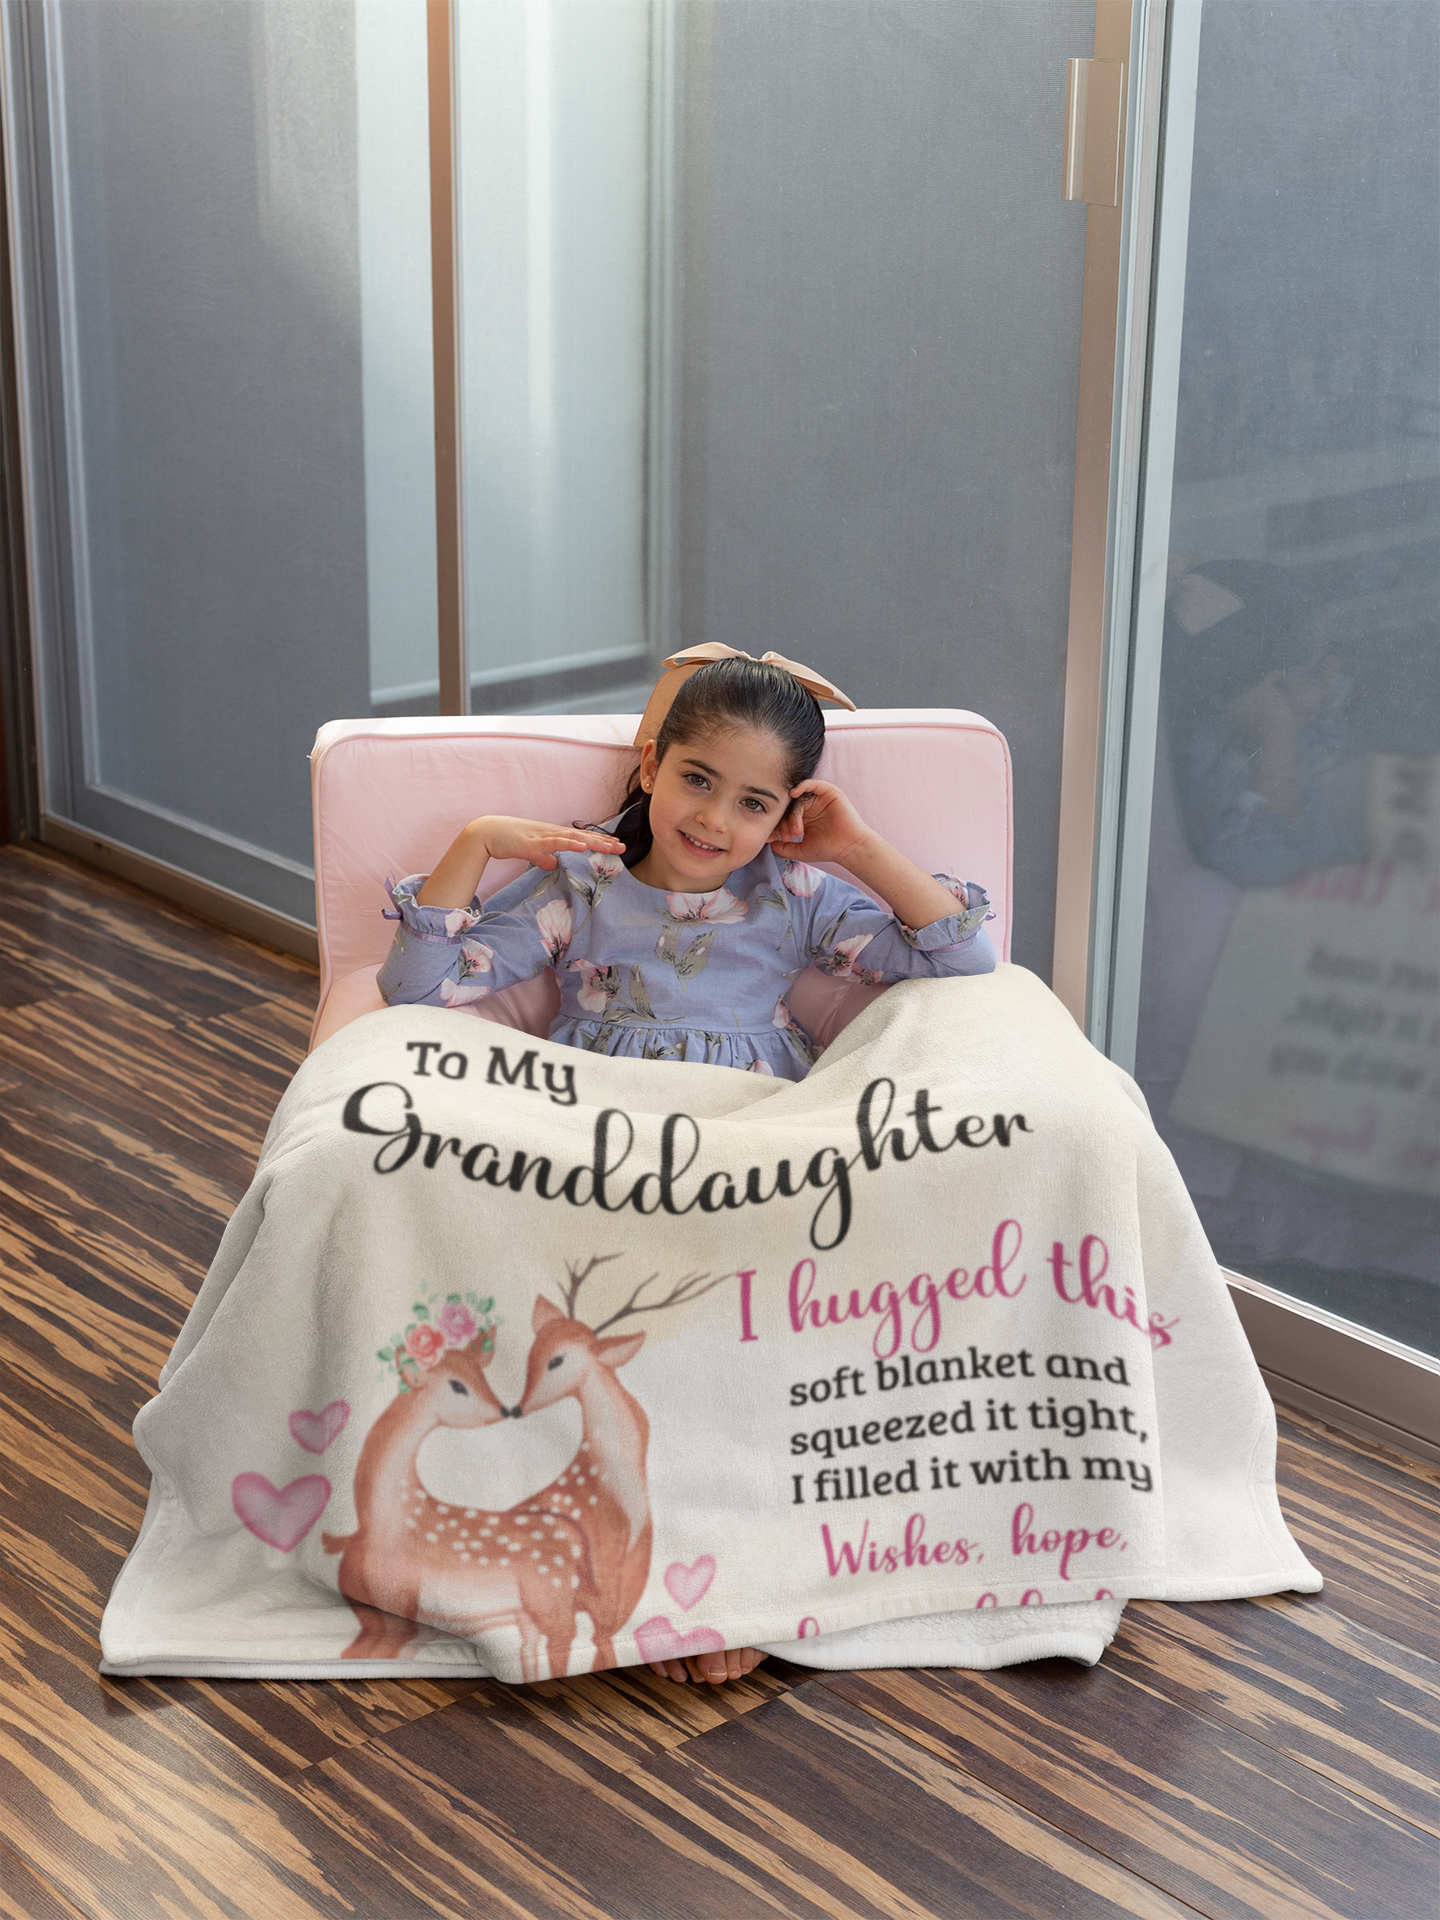 To My Granddaughter | Cute Dear Throw Blanket